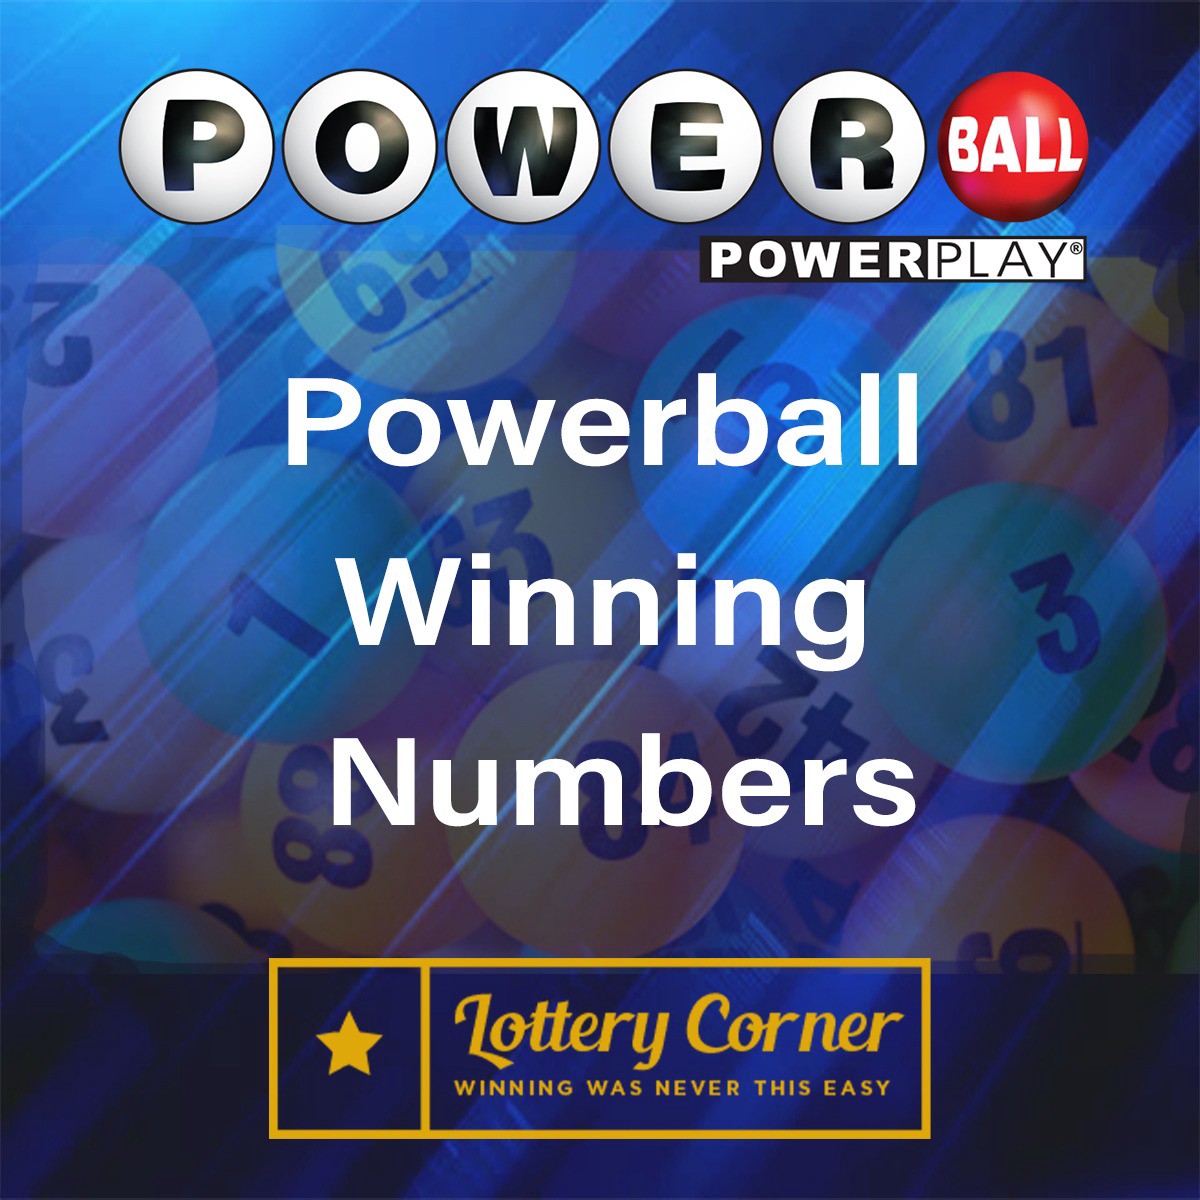 When Will Powerball Drawing Take Place? What Is Powerball Drawing Time